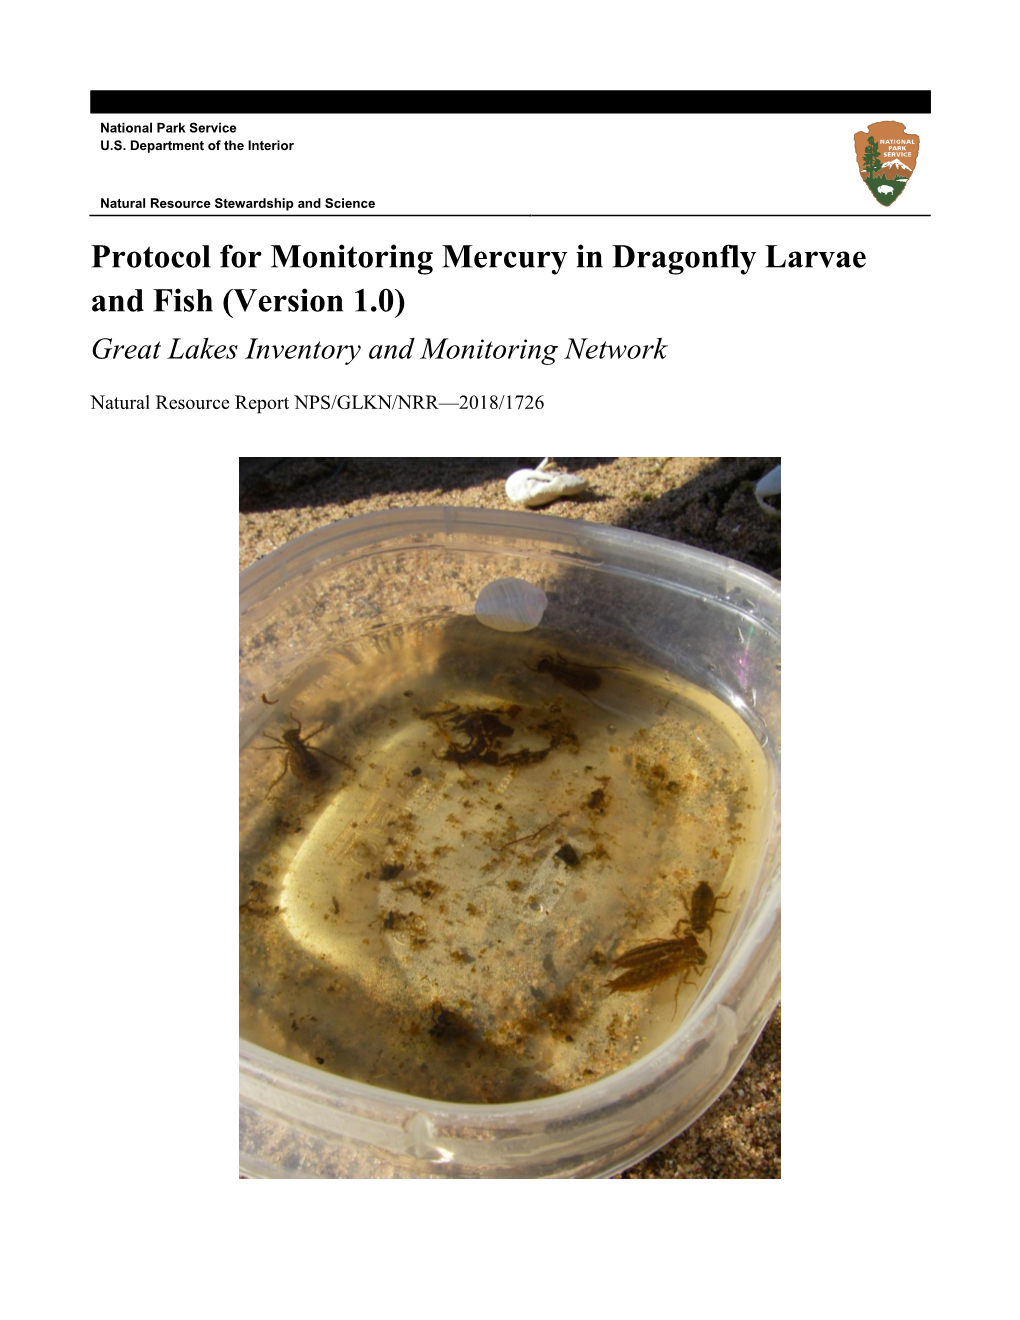 Protocol for Monitoring Mercury in Dragonfly Larvae and Fish (Version 1.0) Great Lakes Inventory and Monitoring Network